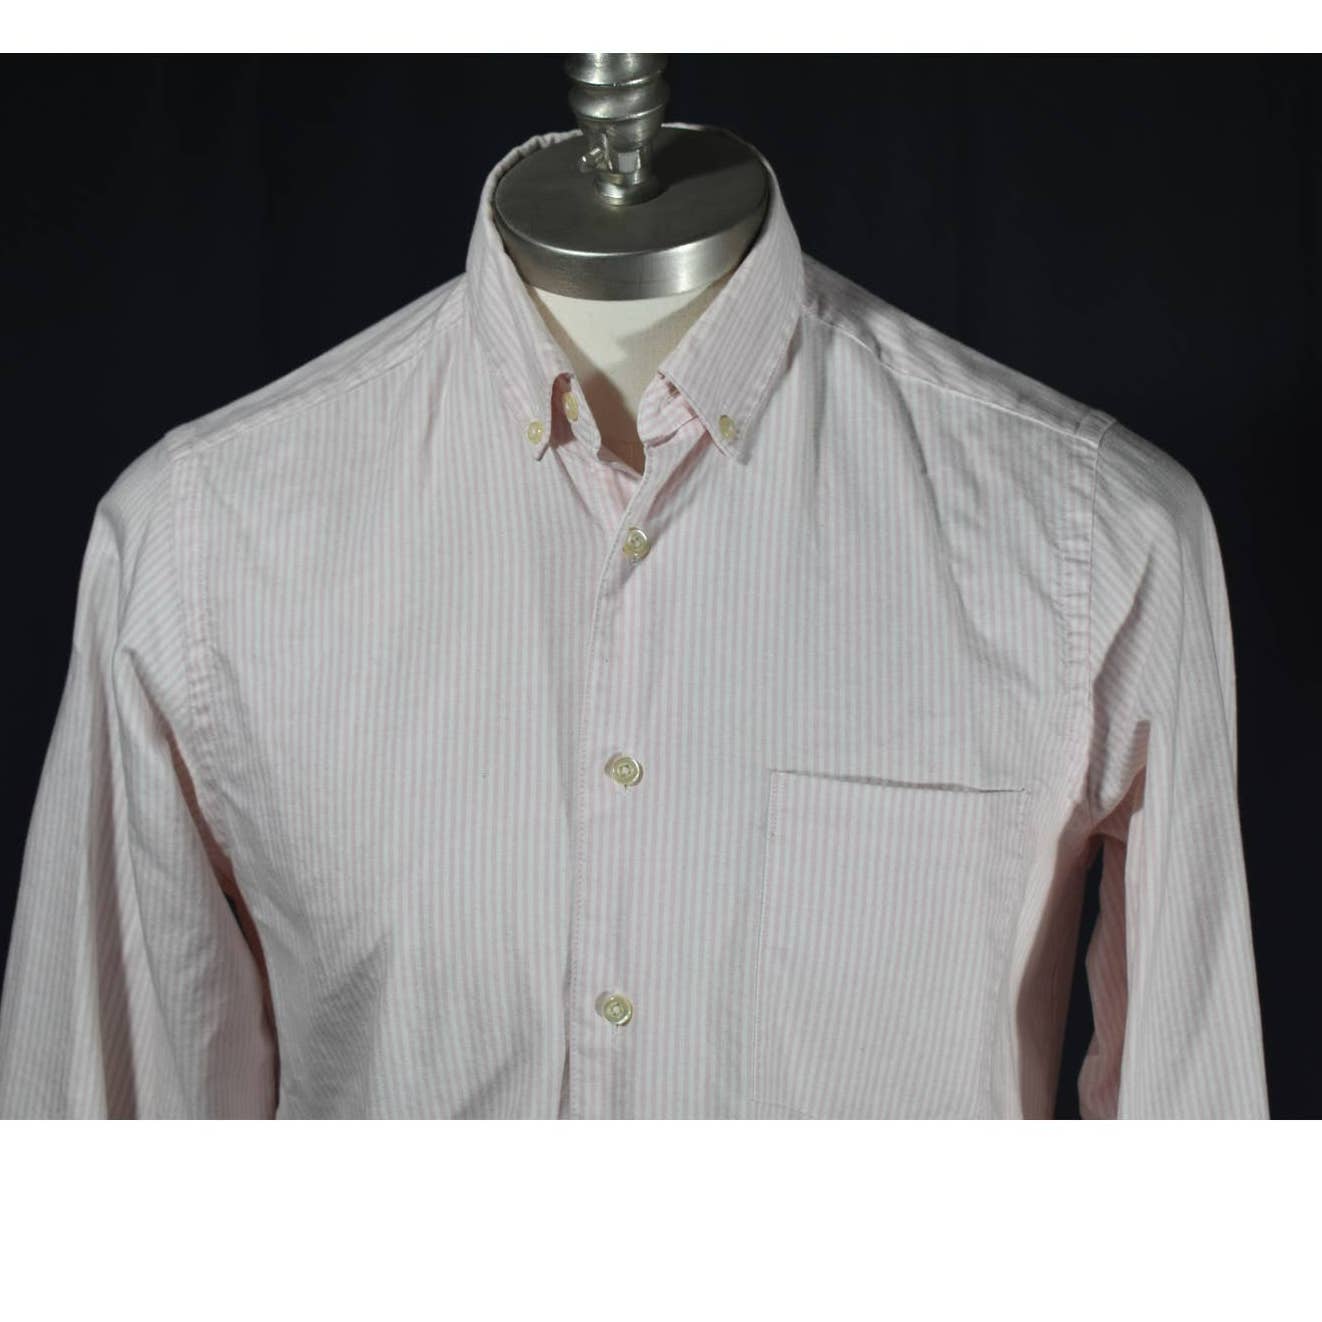 Steven Alan Pink and White Striped Oxford Shirt - S